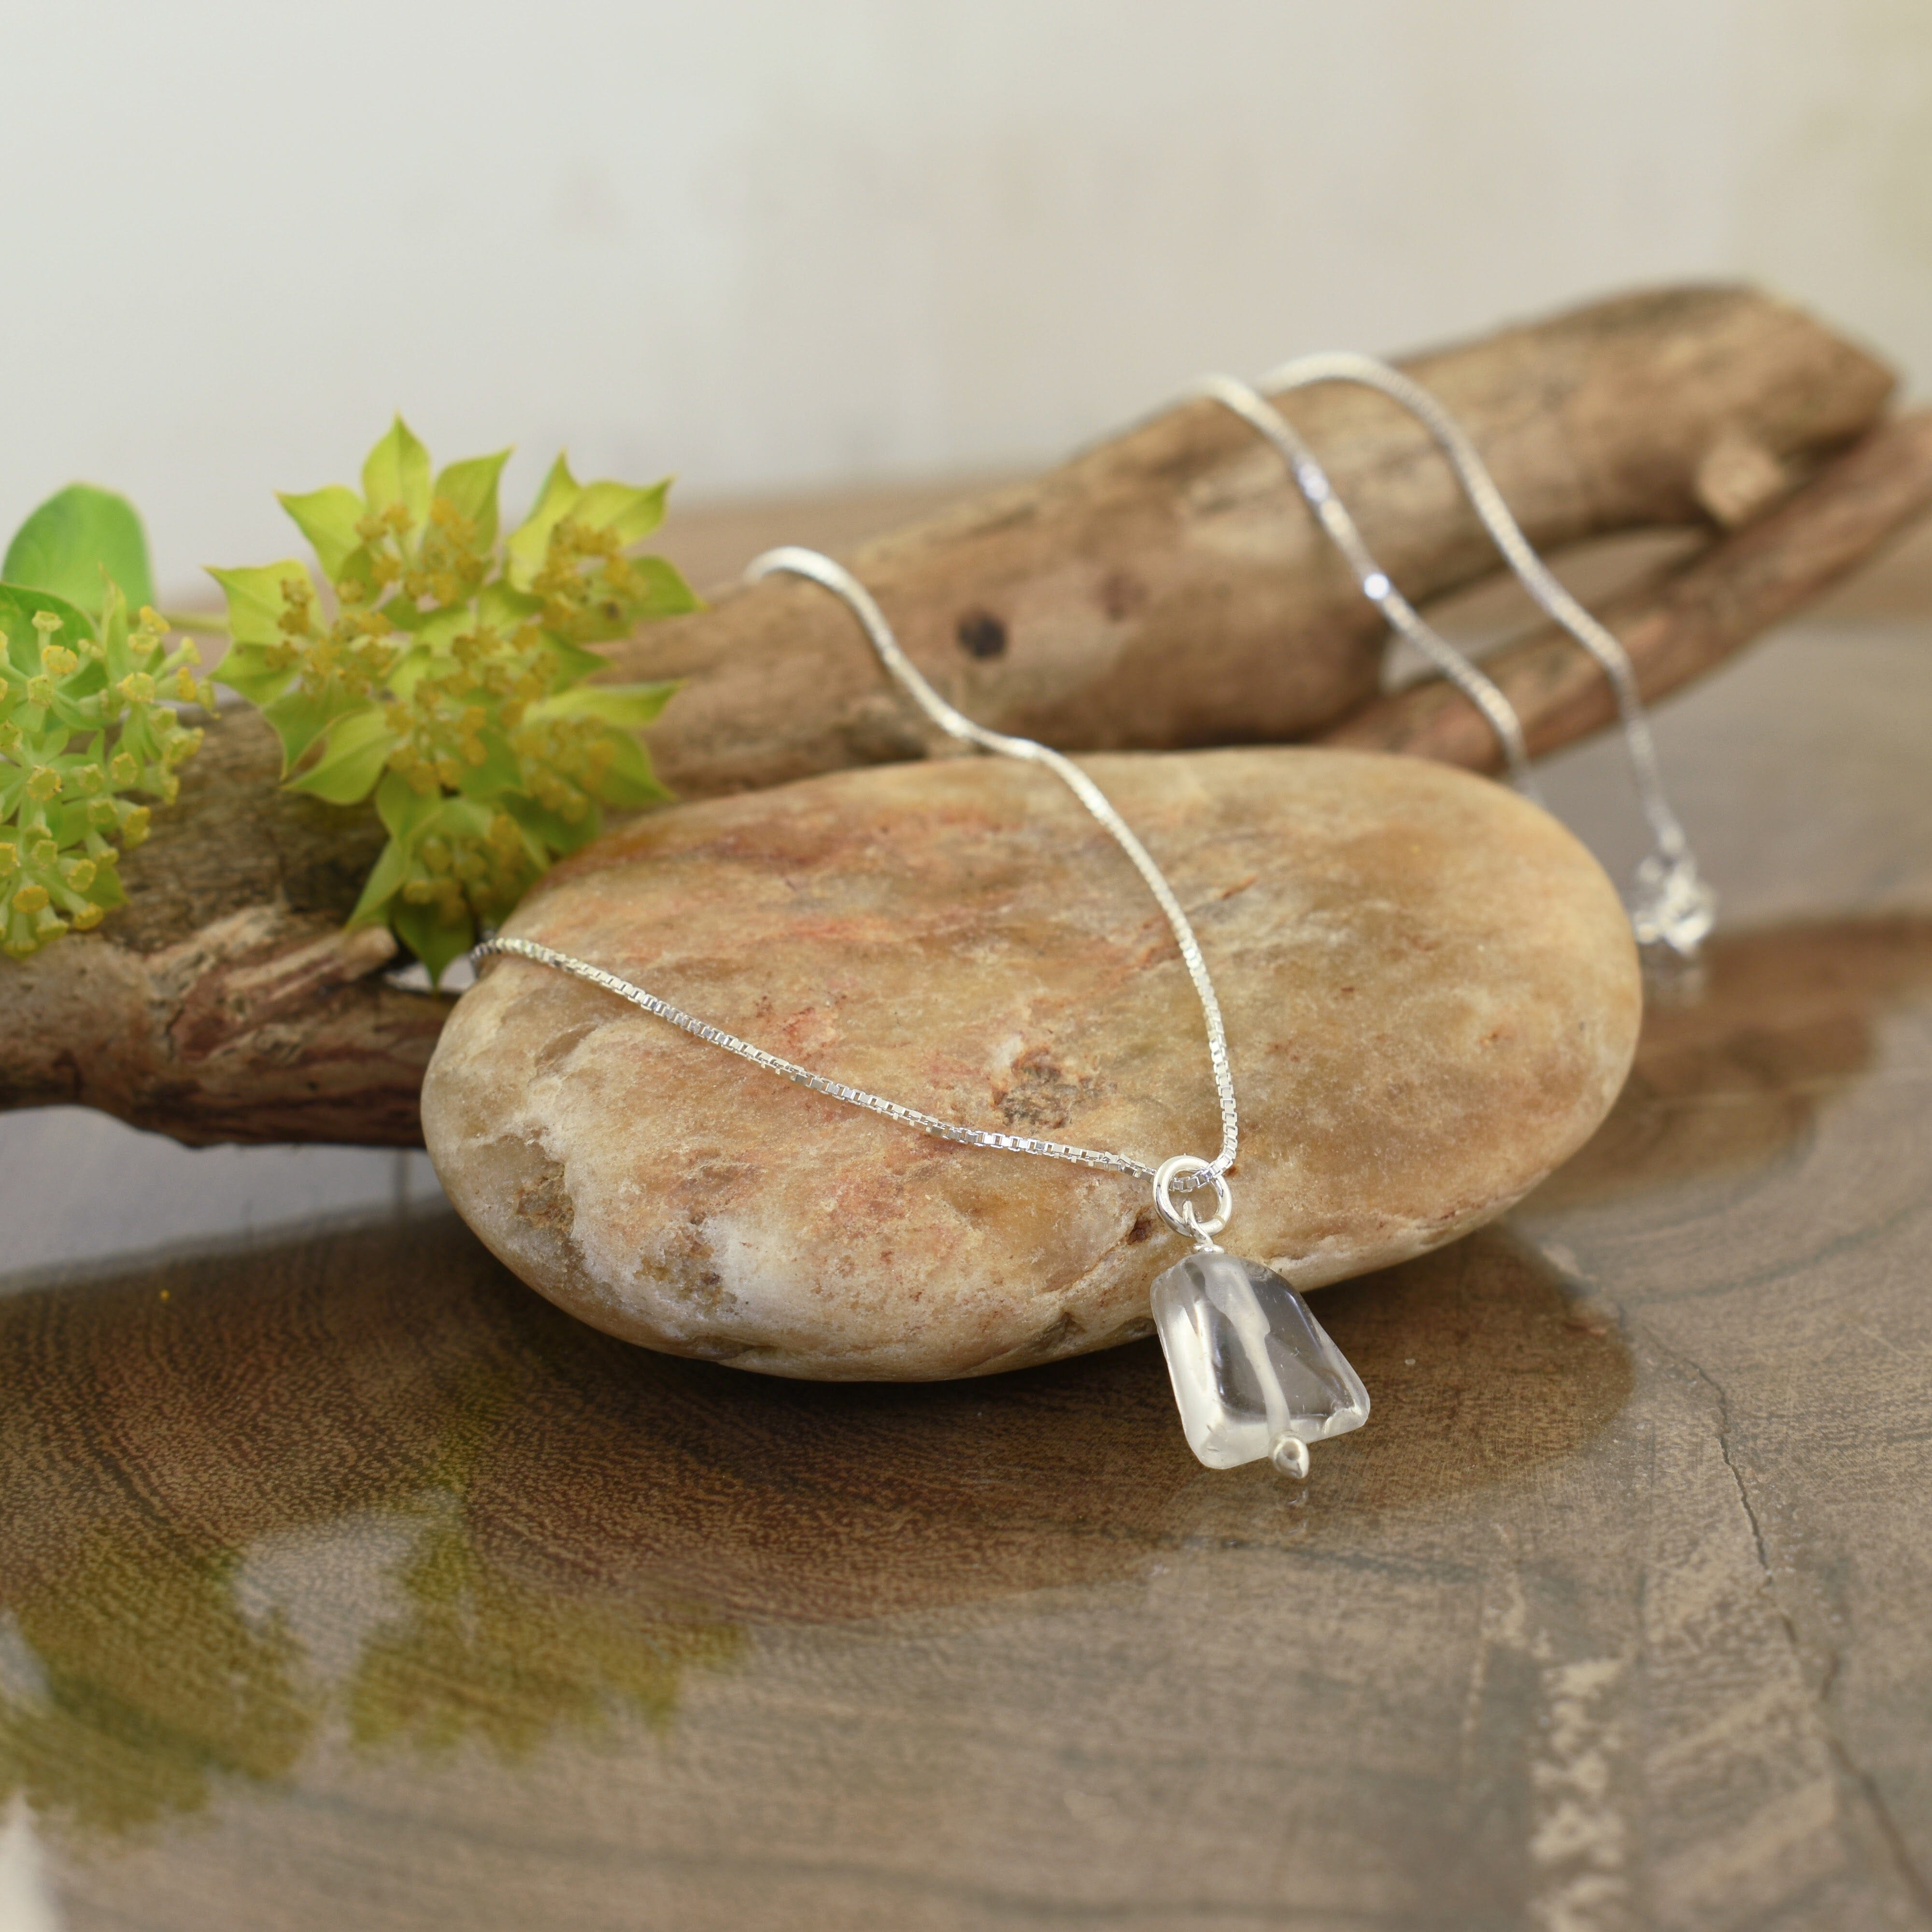 .925 sterling silver and white quartz necklace